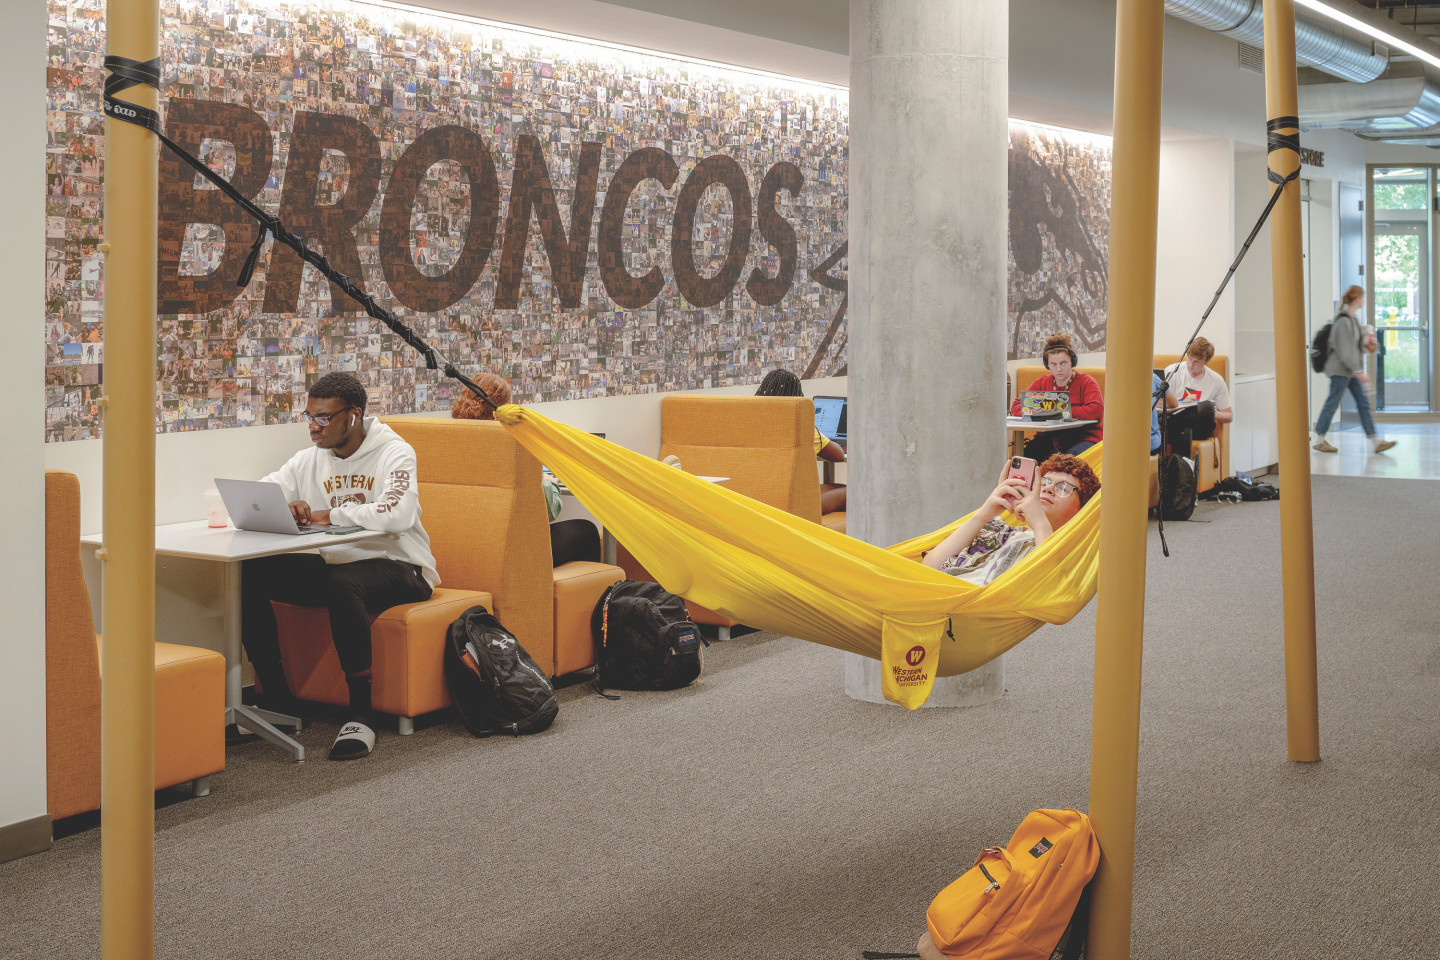 A student relaxes in a yellow hammock.